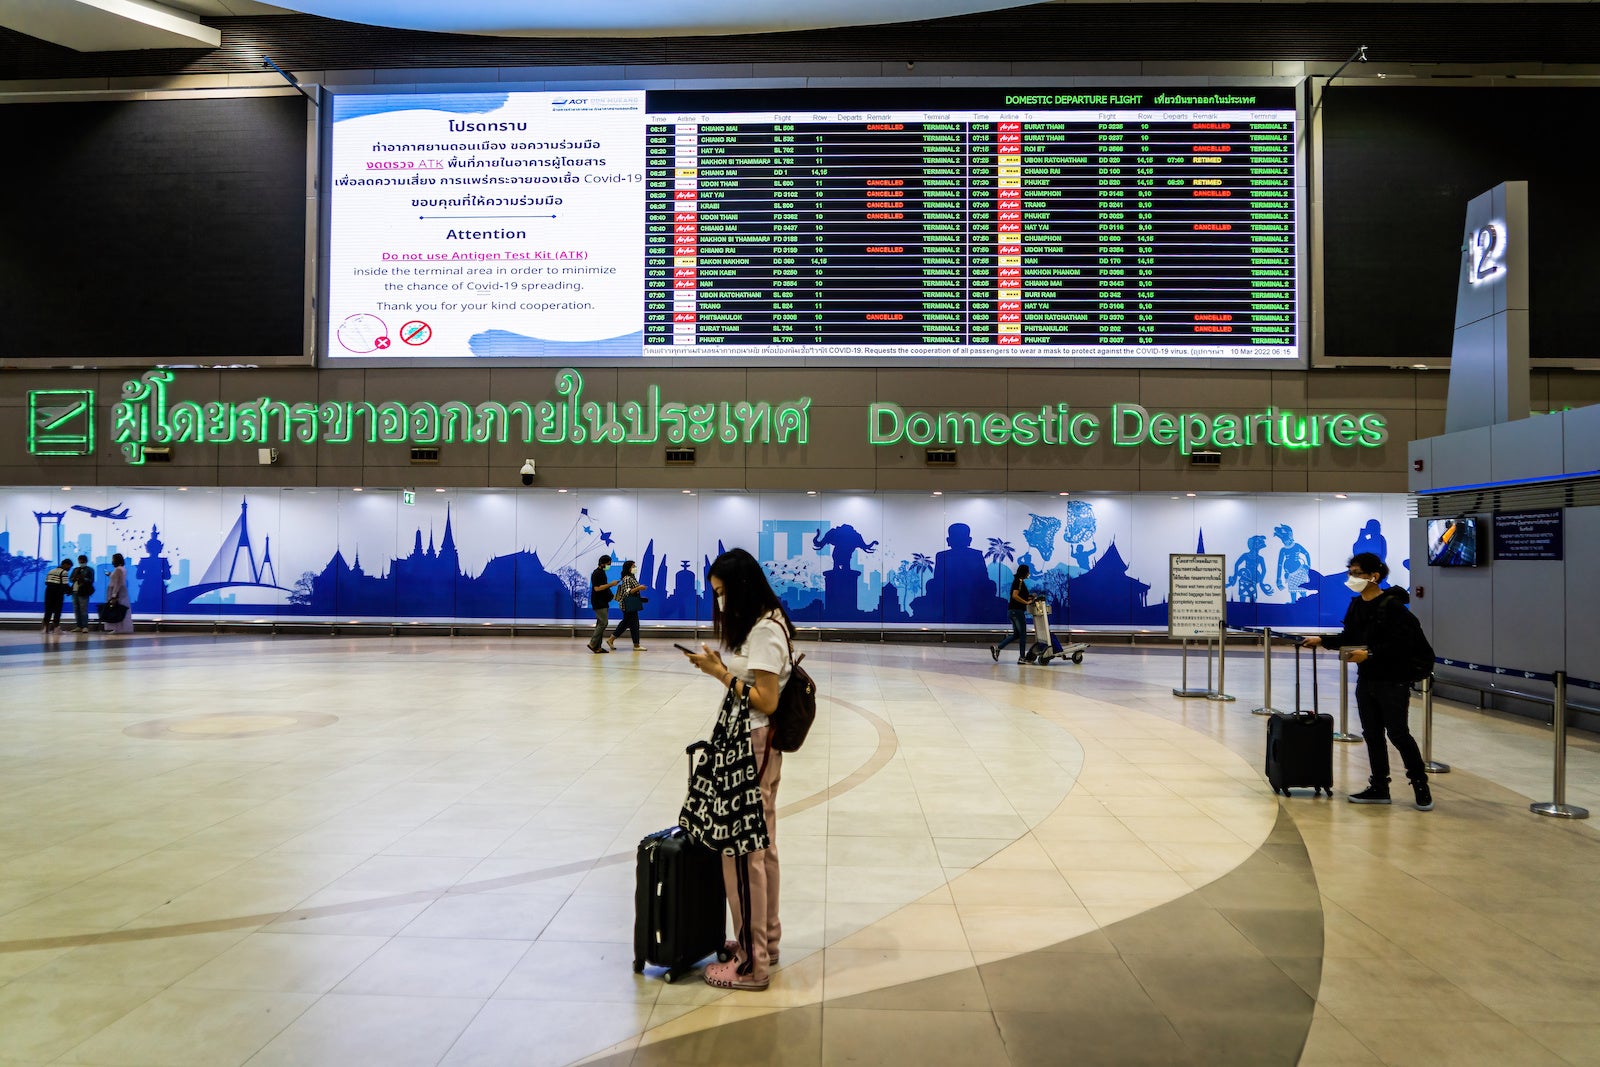 Passengers wait in the domestic departures hall at Don